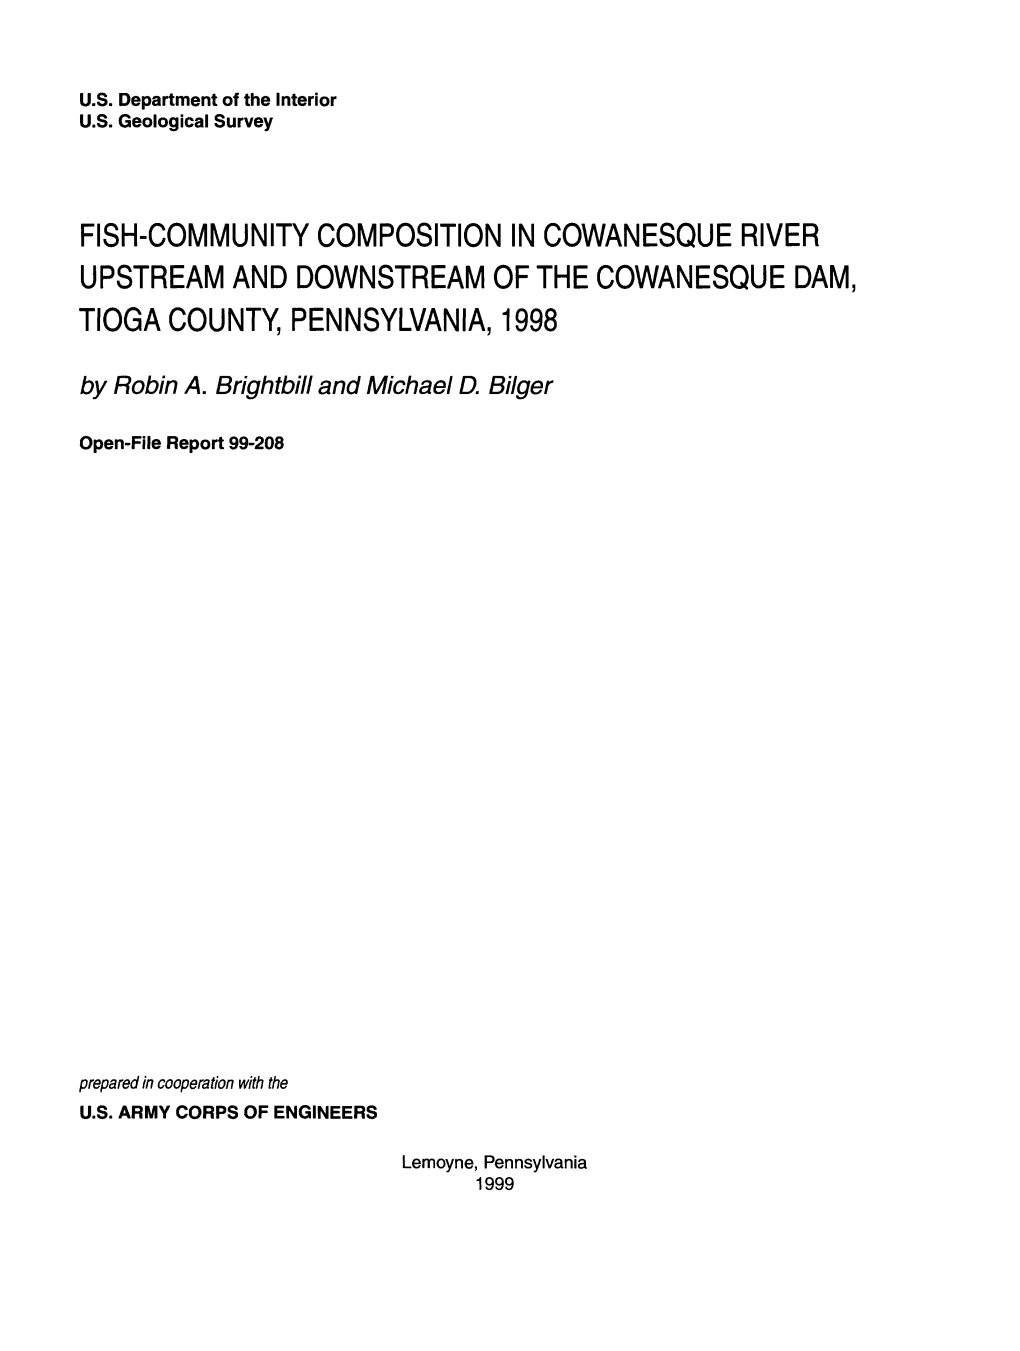 Fish-Community Composition in Cowanesque River Upstream and Downstream of the Cowanesque Dam, Tioga County, Pennsylvania, 1998